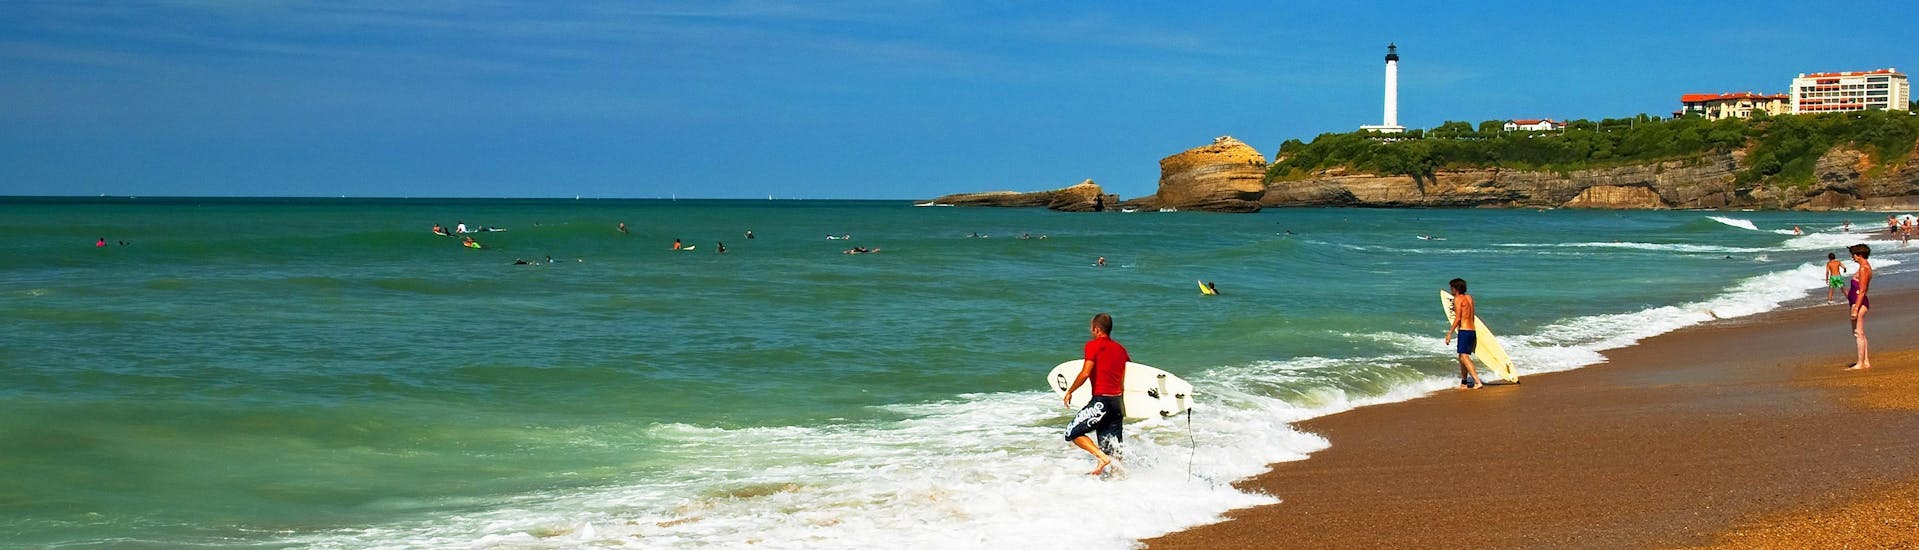 A young woman surfing in the clear blue waters of the surfing and SUP hotspot of La Côte des Basques.